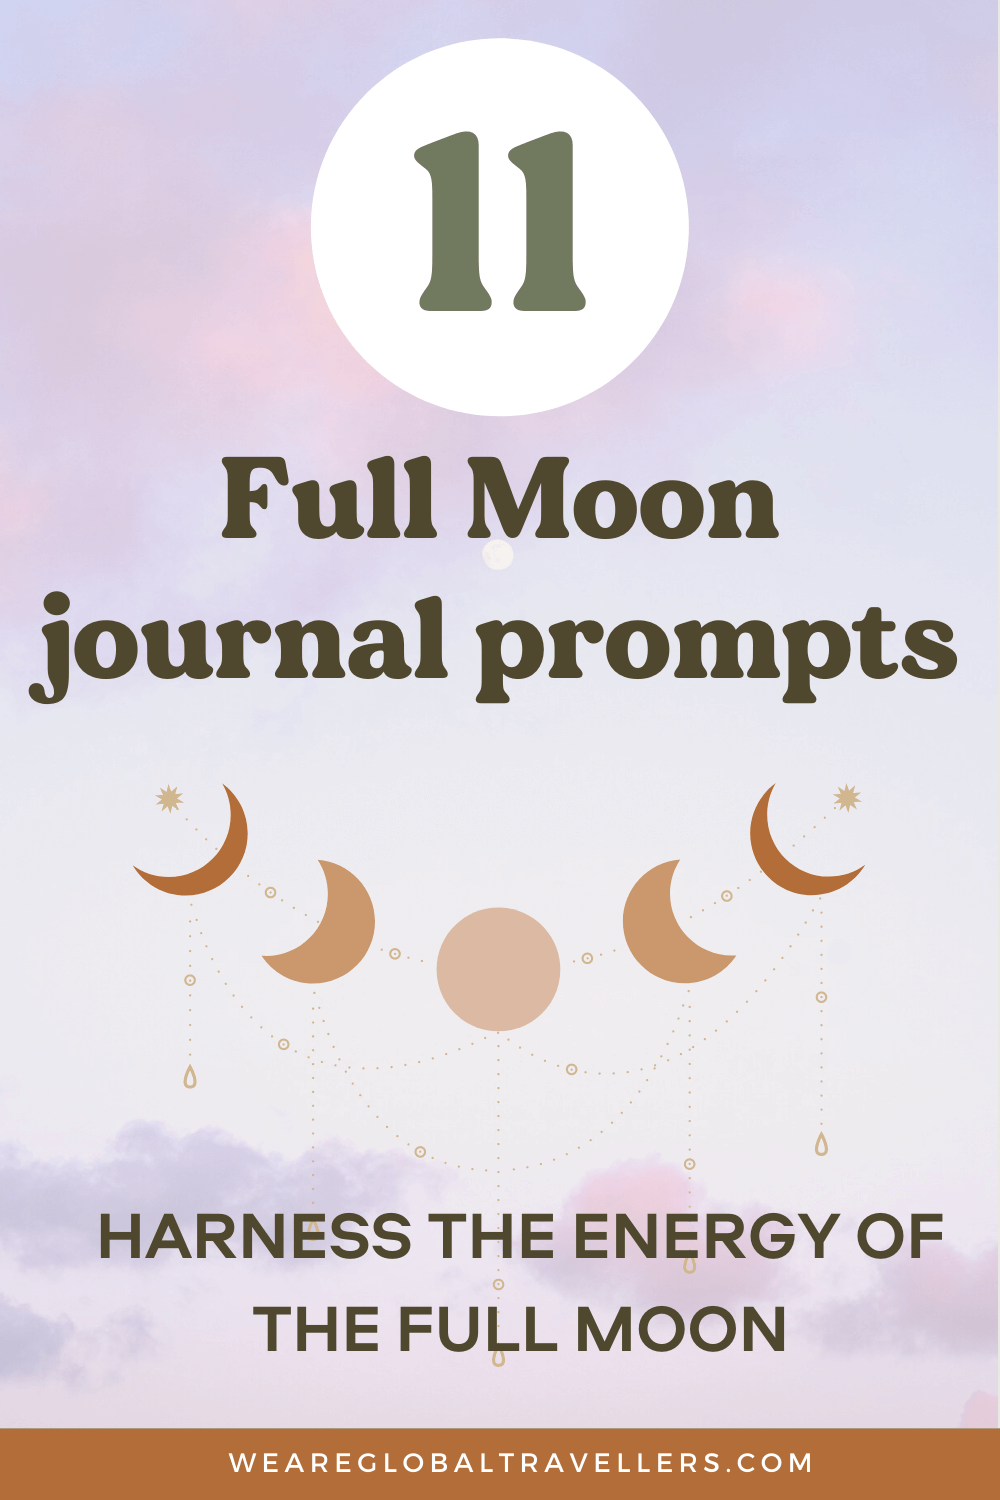 Full Moon Journal Prompts for 2022